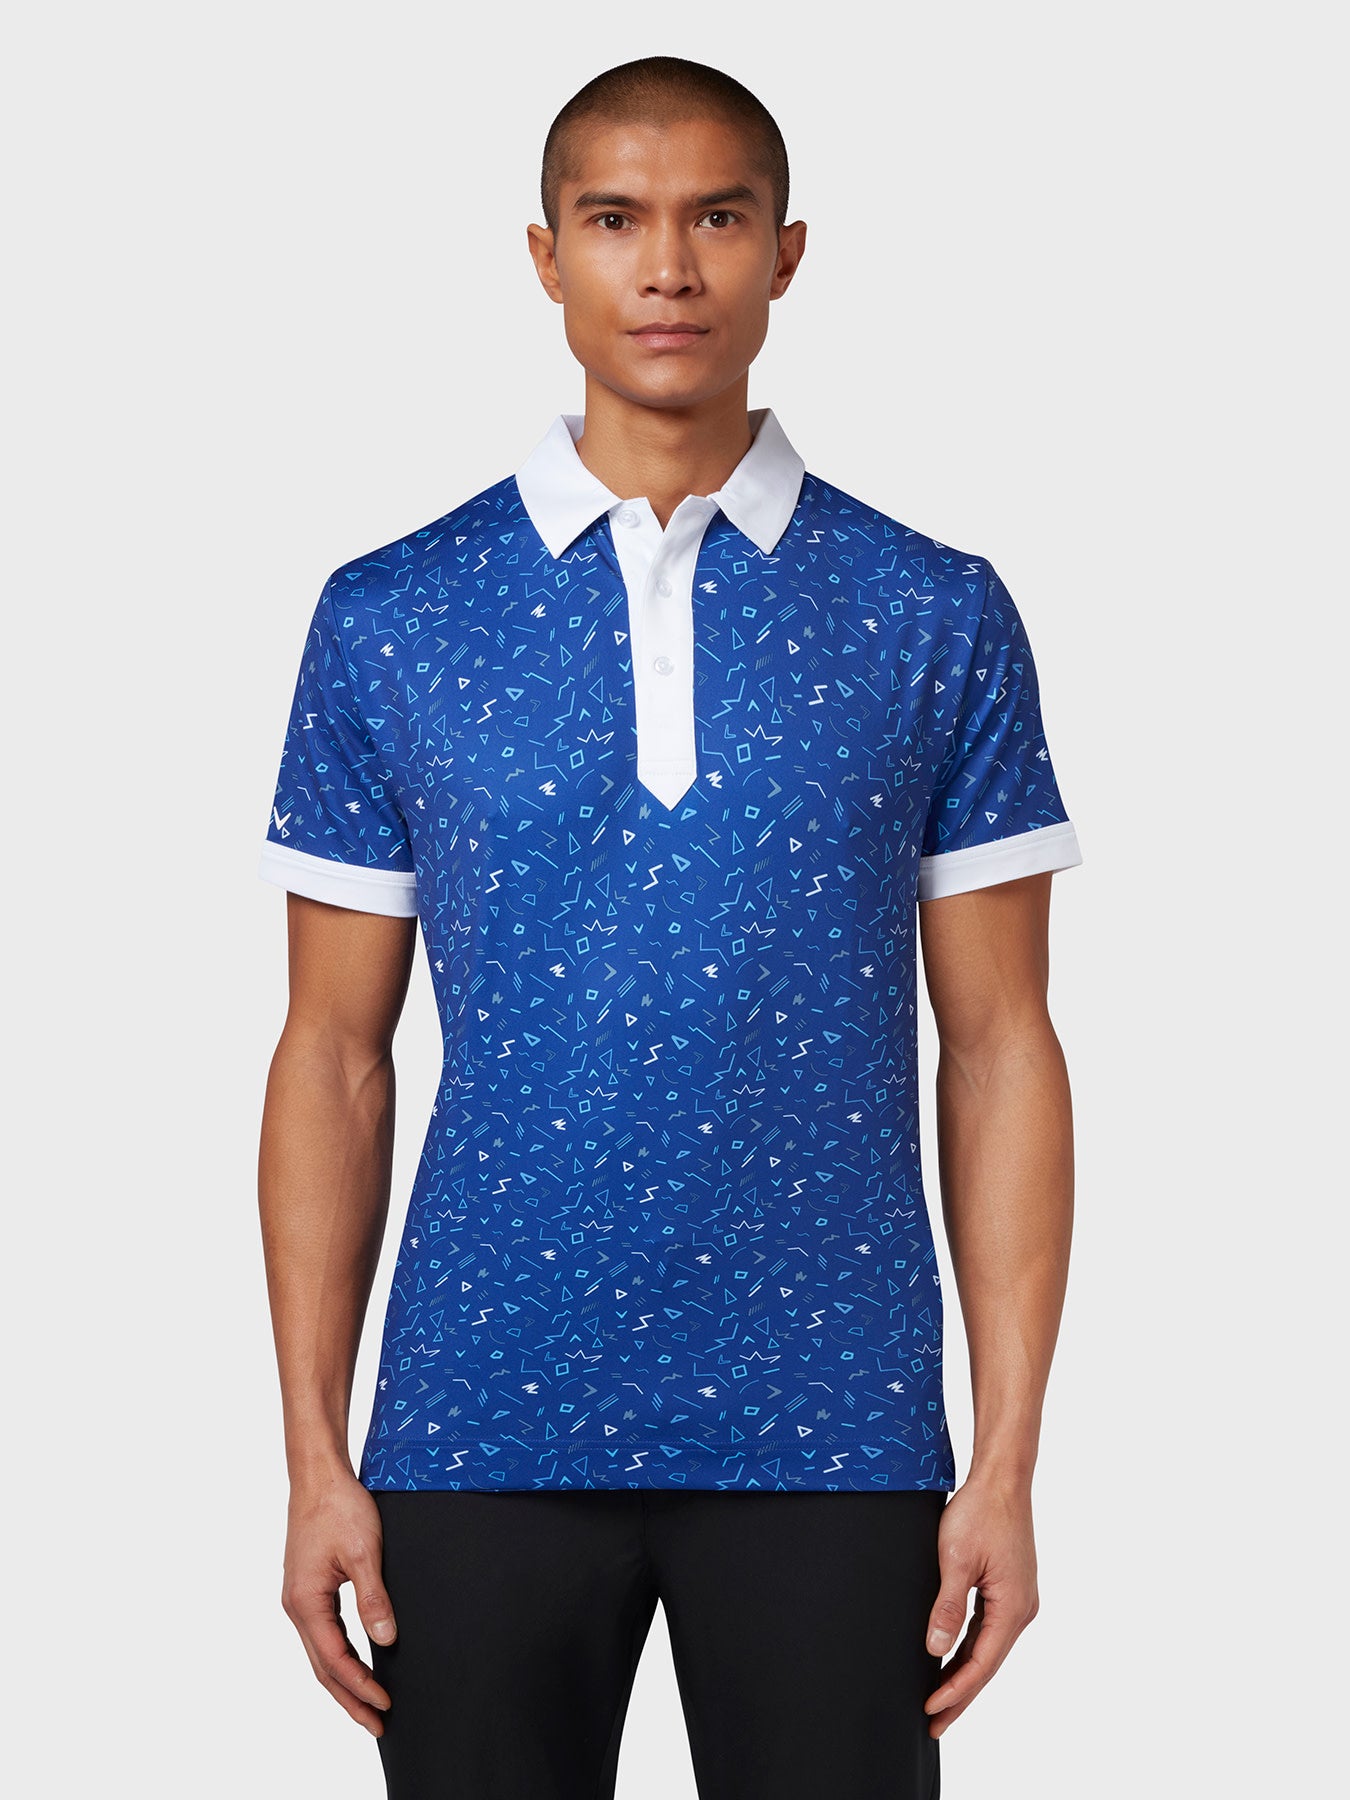 View X Series Chev Memphis All Over Print Polo In Clematis Blue Clematis Blue XL information